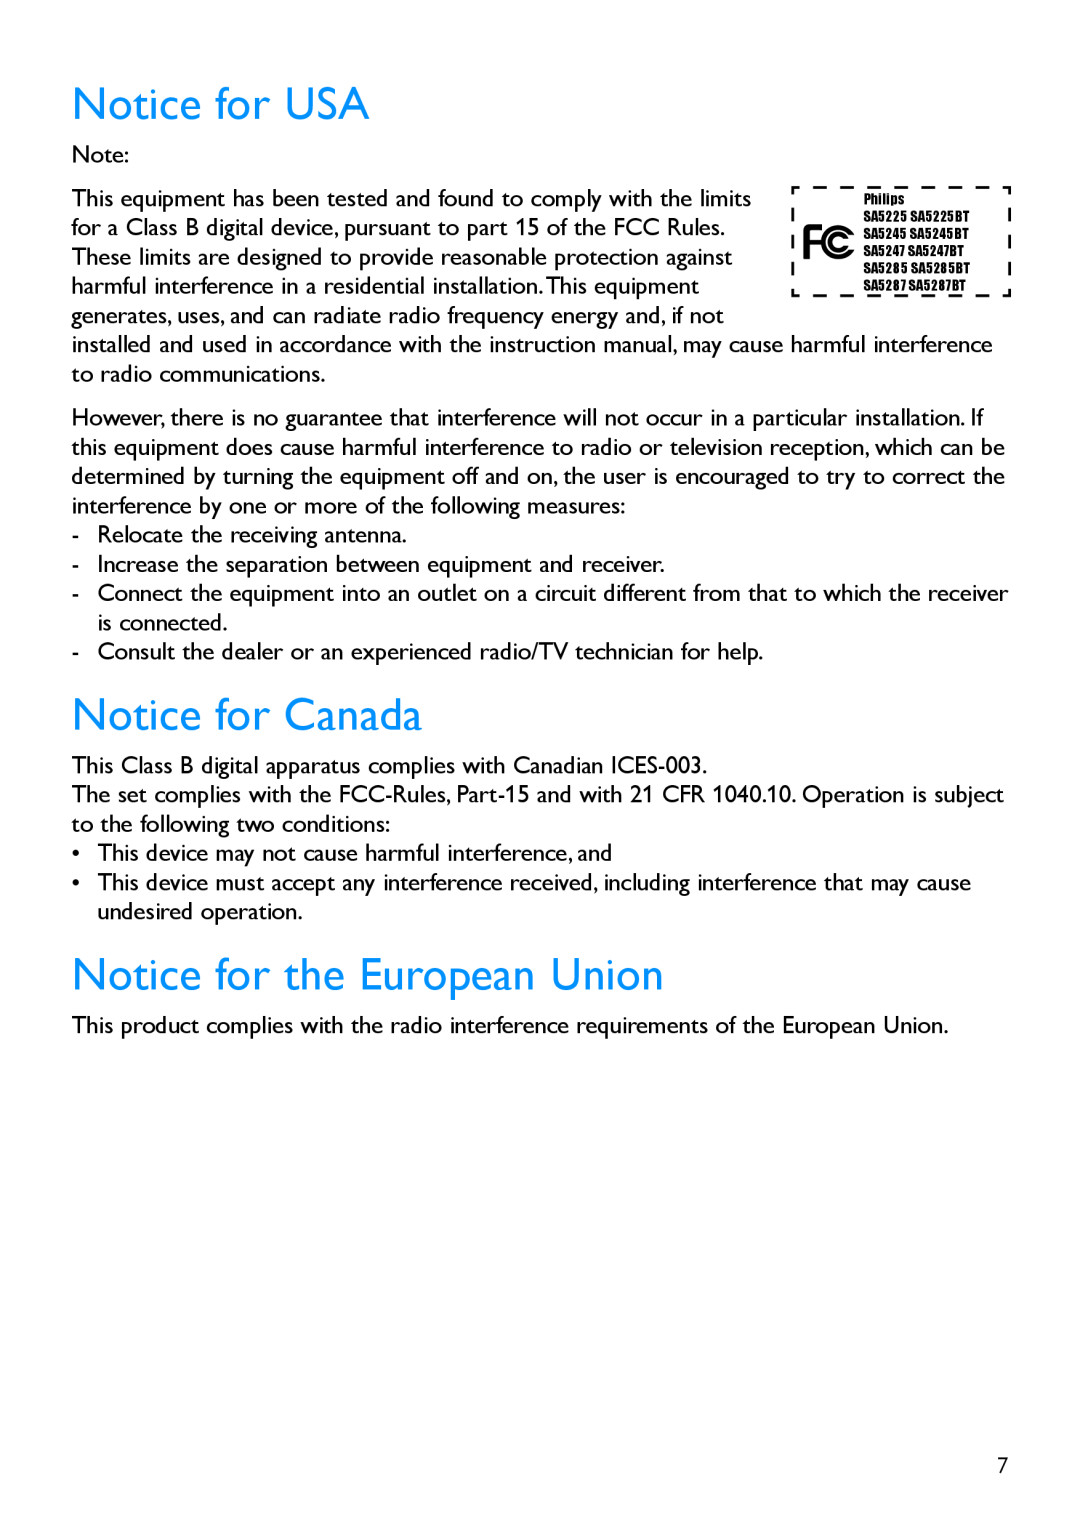 Philips SA5225, SA5295 manual Notice for USA, Notice for Canada, Notice for the European Union 